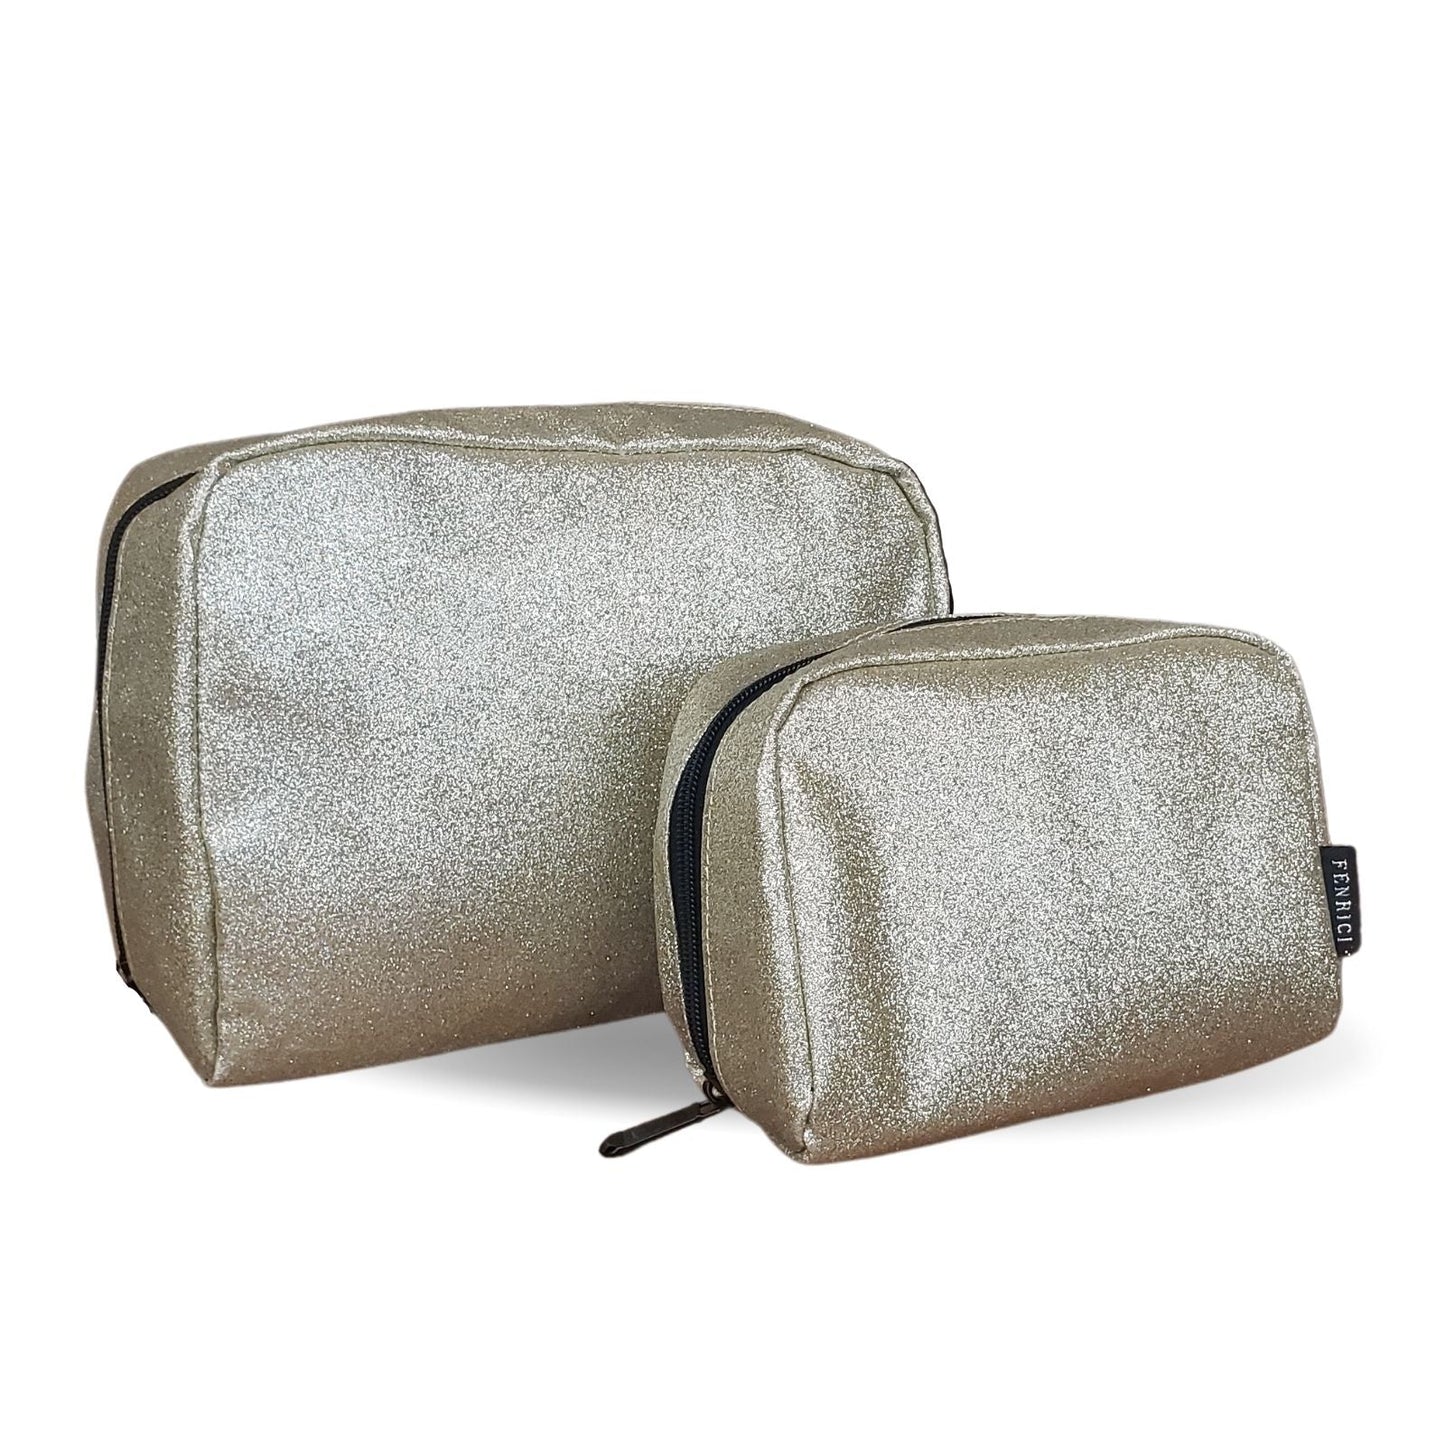 Travel Cosmetic Pouch Set, 2 Pack - Gold Glitter